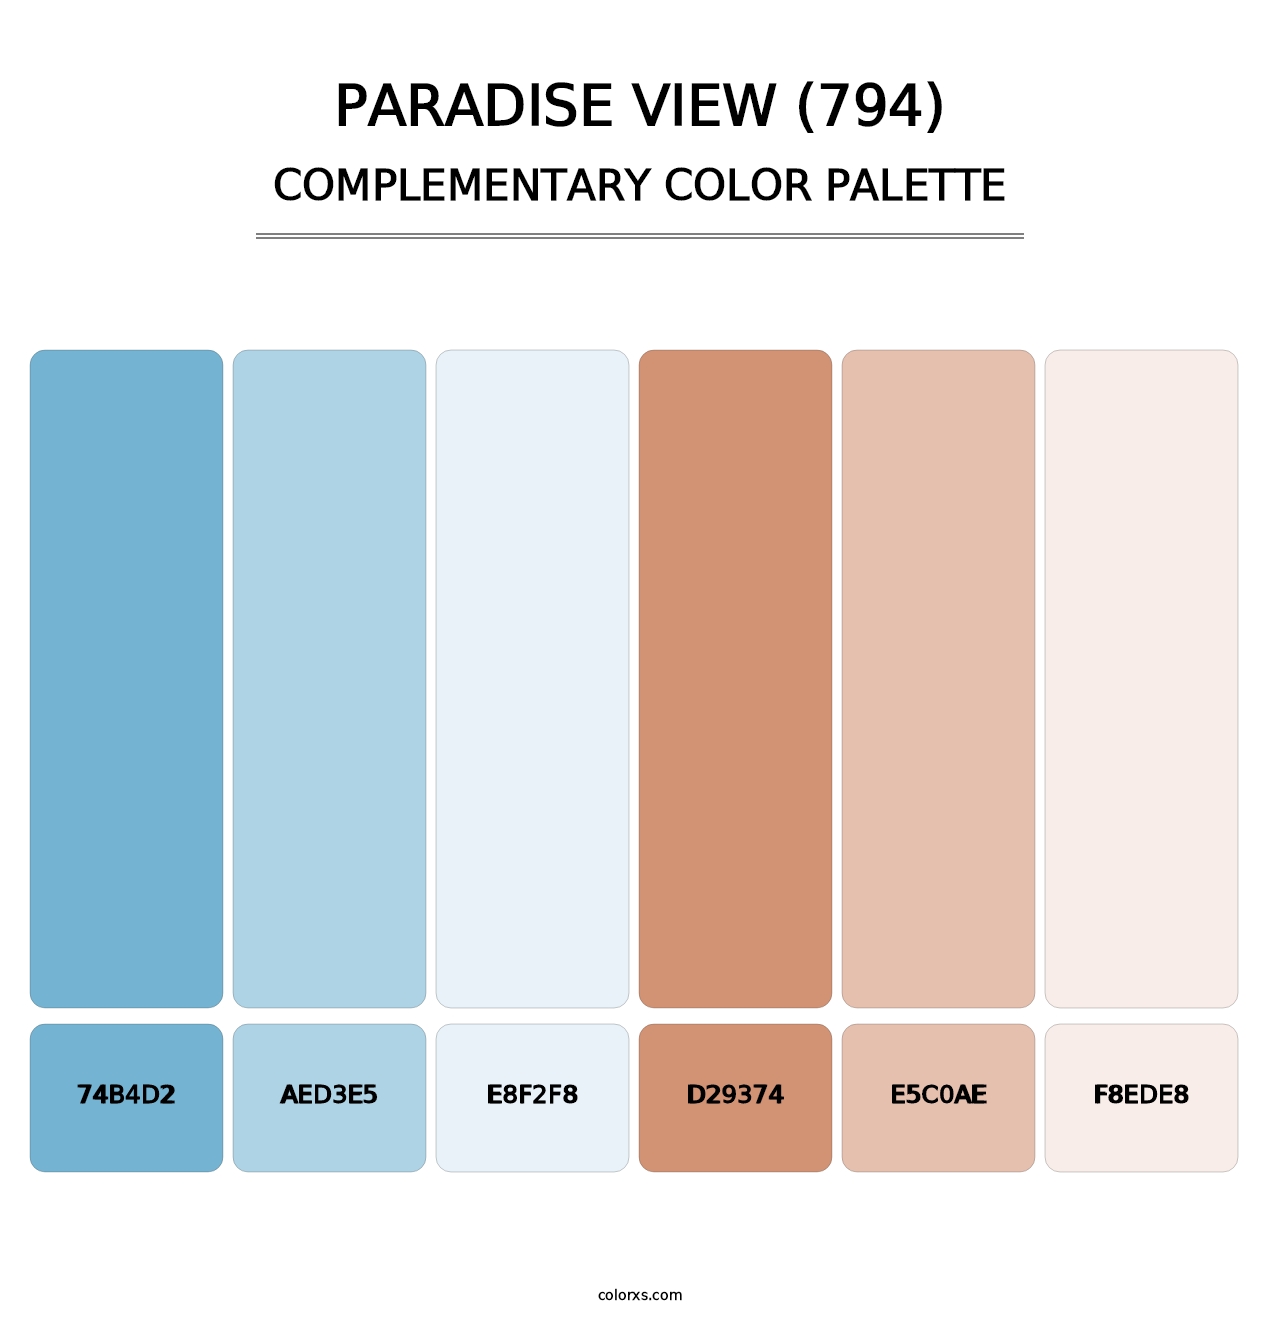 Paradise View (794) - Complementary Color Palette